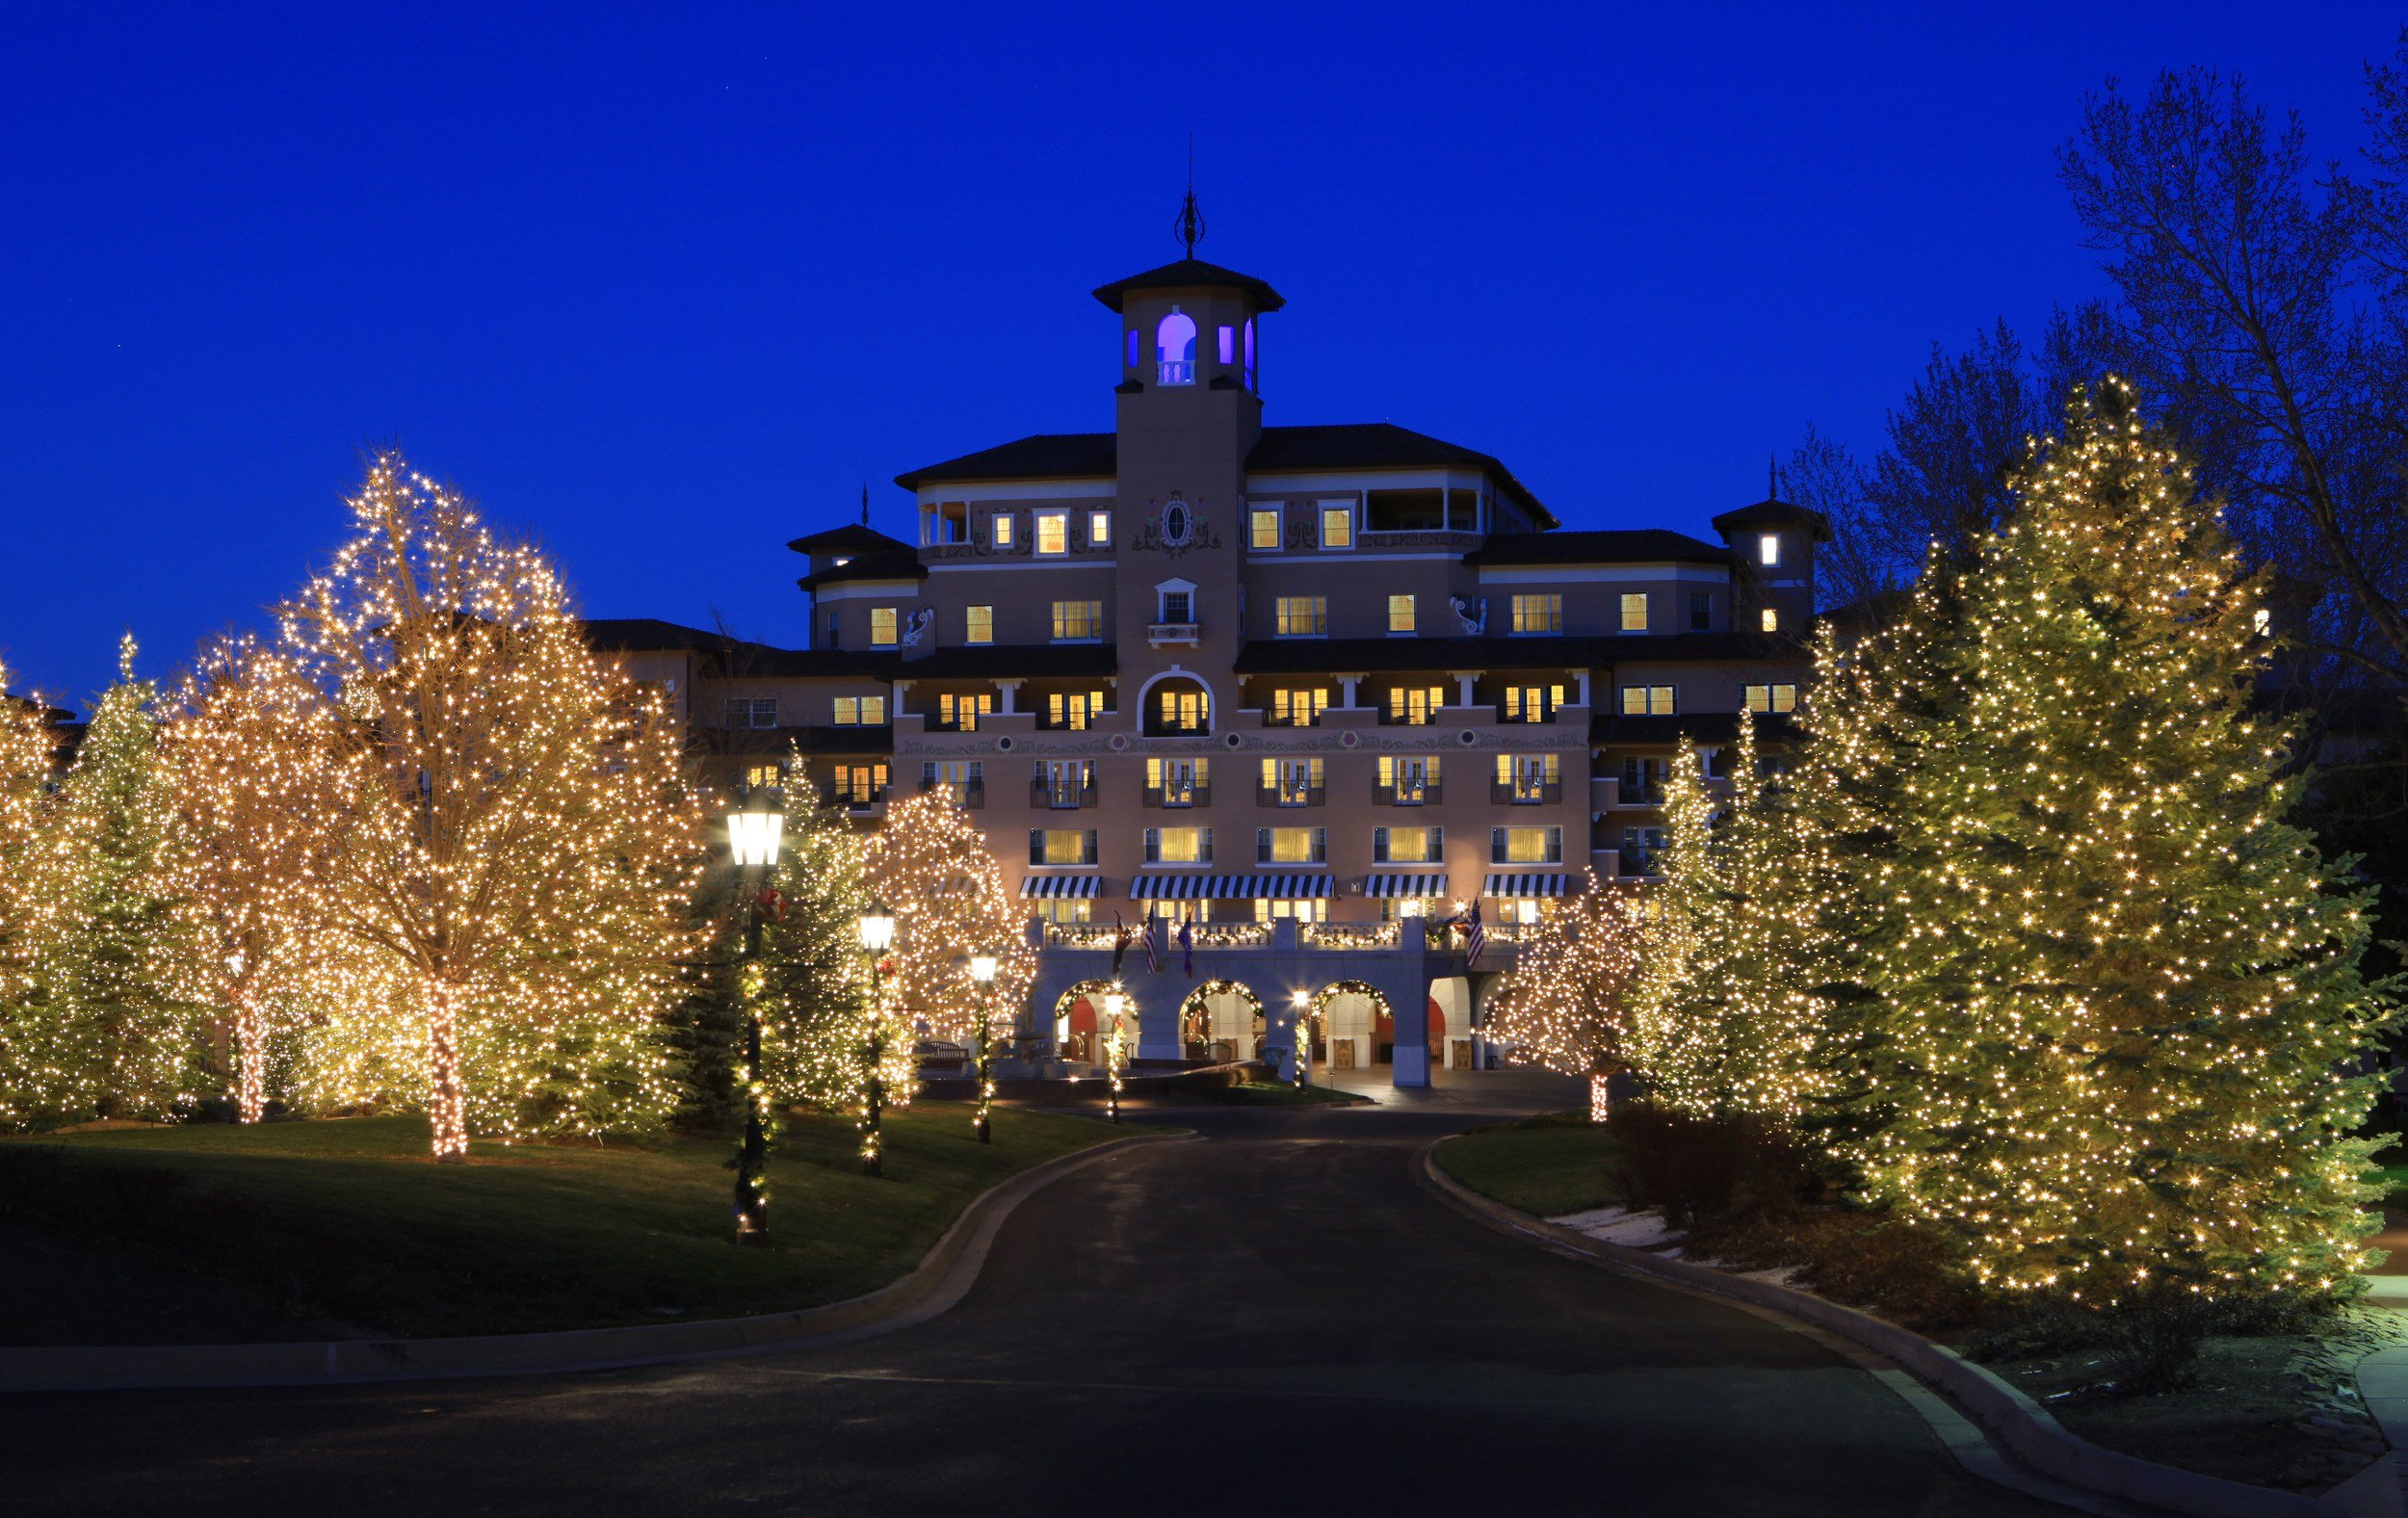 The Broadmoor Hotel in Colorado Springs, all dolled up for Christmas